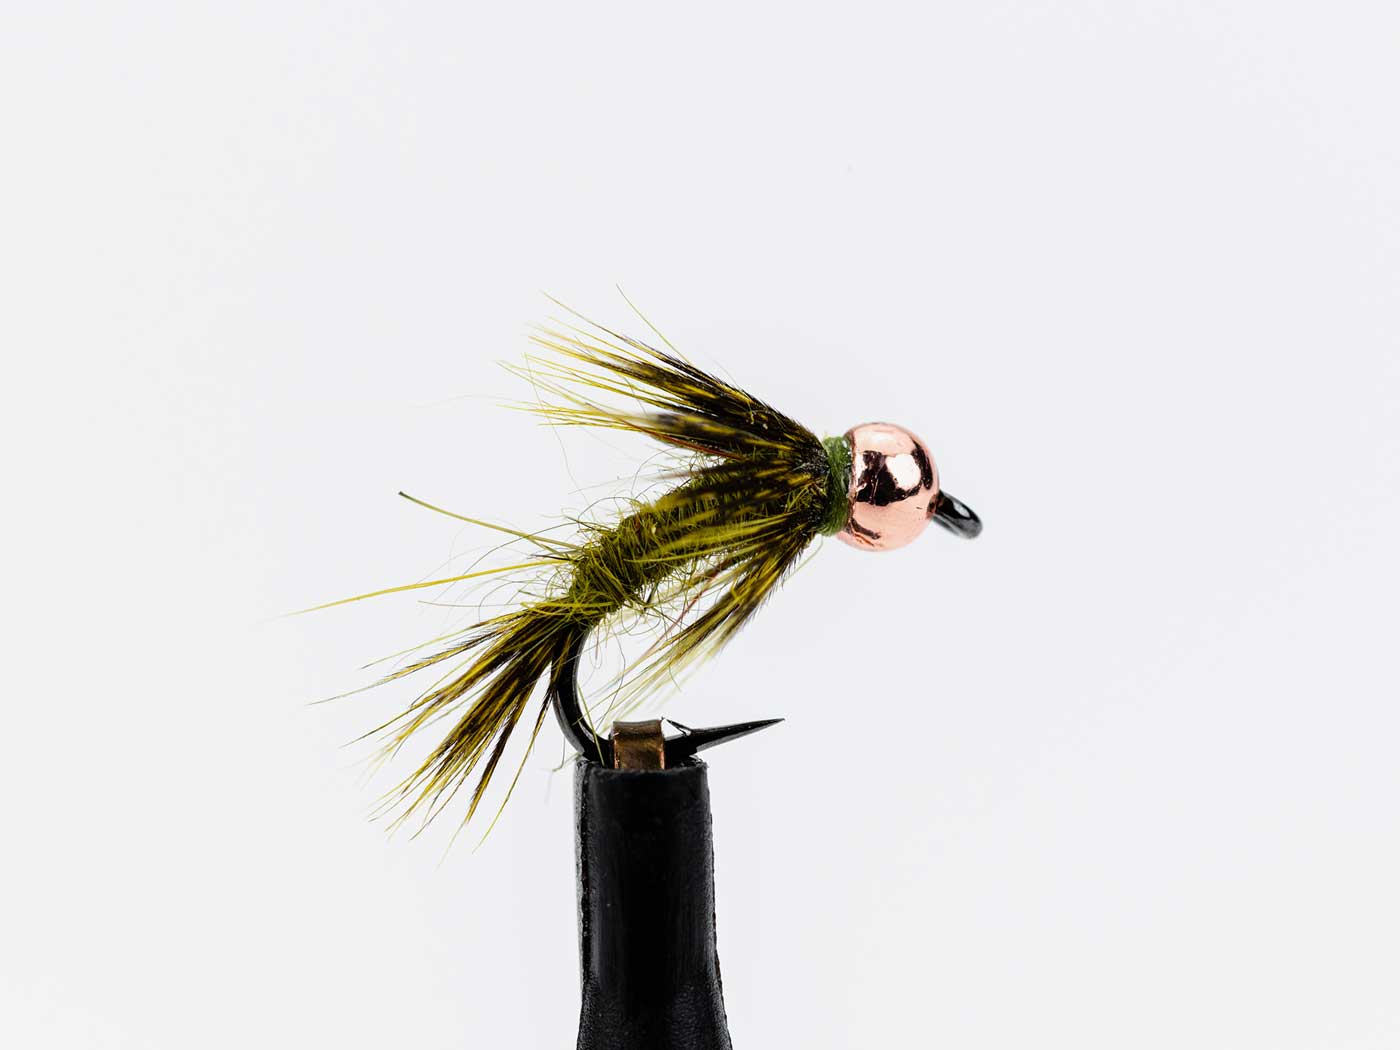 Buy The Soft Hackled Fly and Tiny Soft Hackles: A Trout